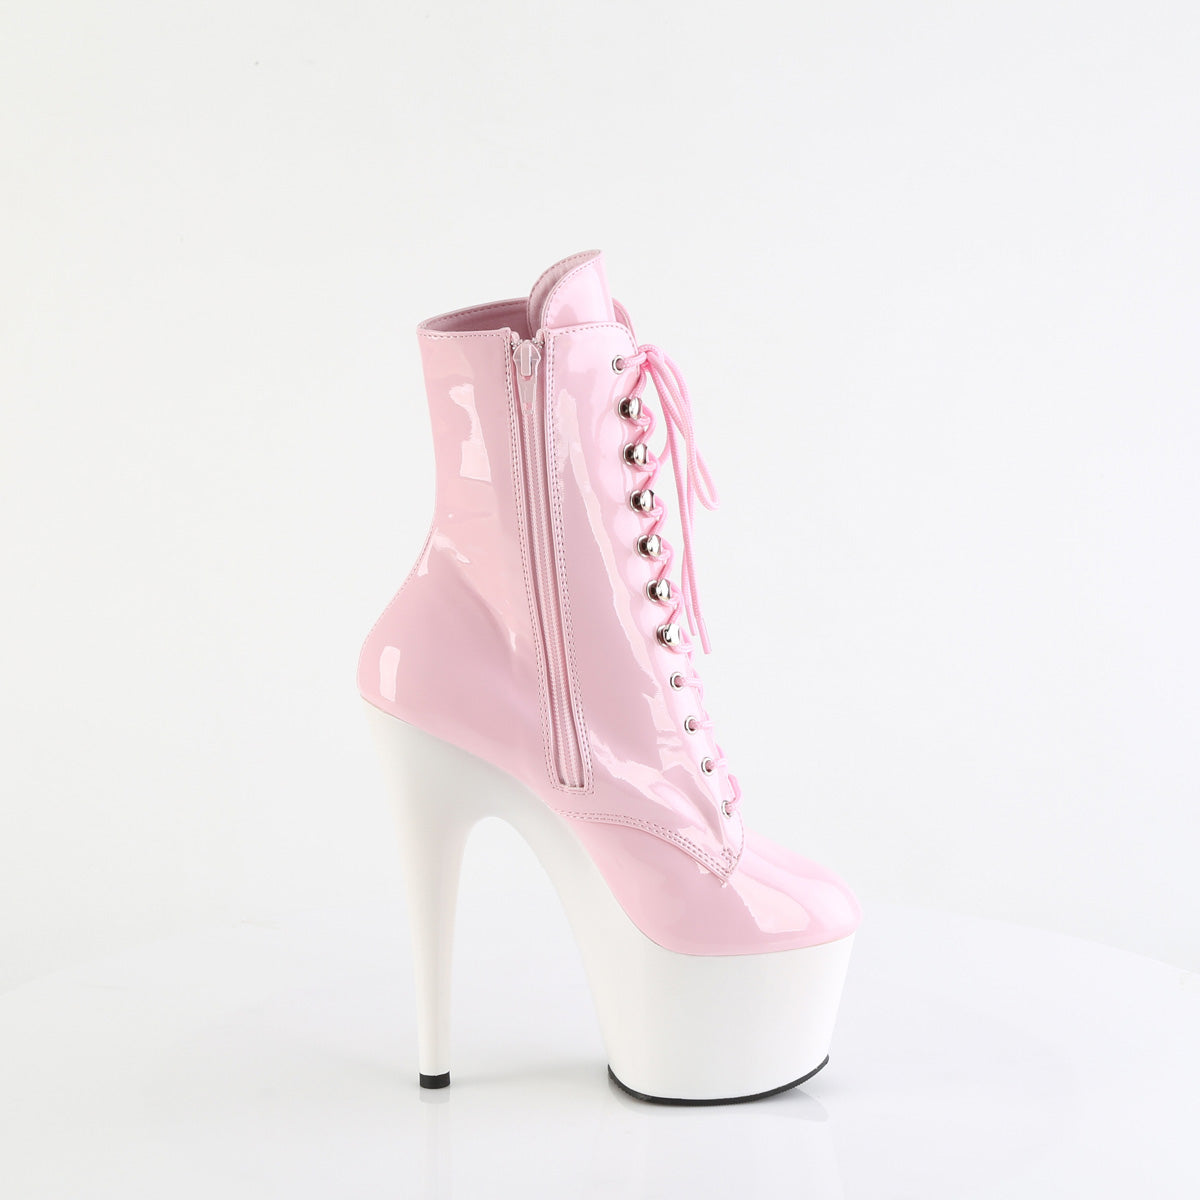 ADORE-1020 Pleaser B Pink Patent/White Platform Shoes [Sexy Footwear]